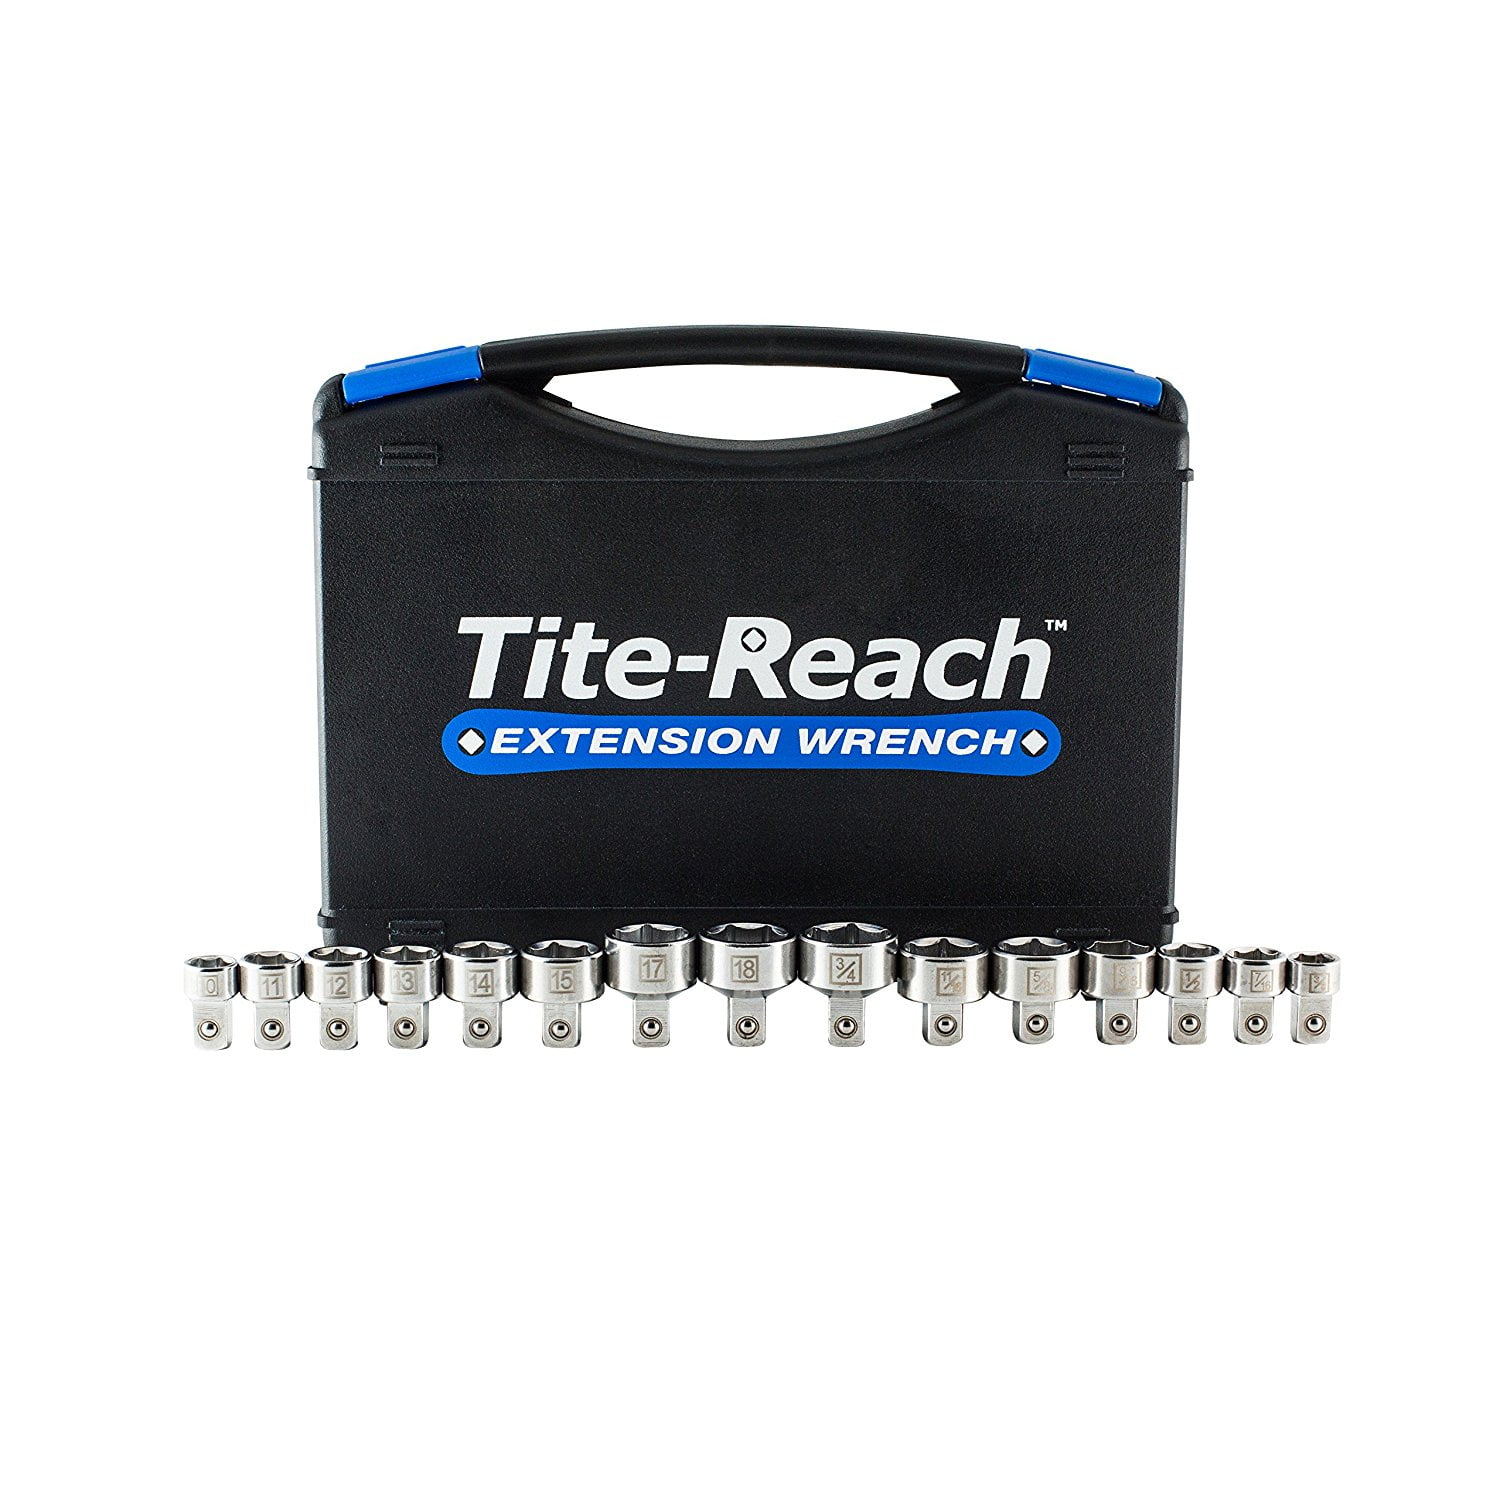 Tite-Reach TR38V1 3/8 Professional Extension Wrench & LOW PROFILE SOCKET  KIT